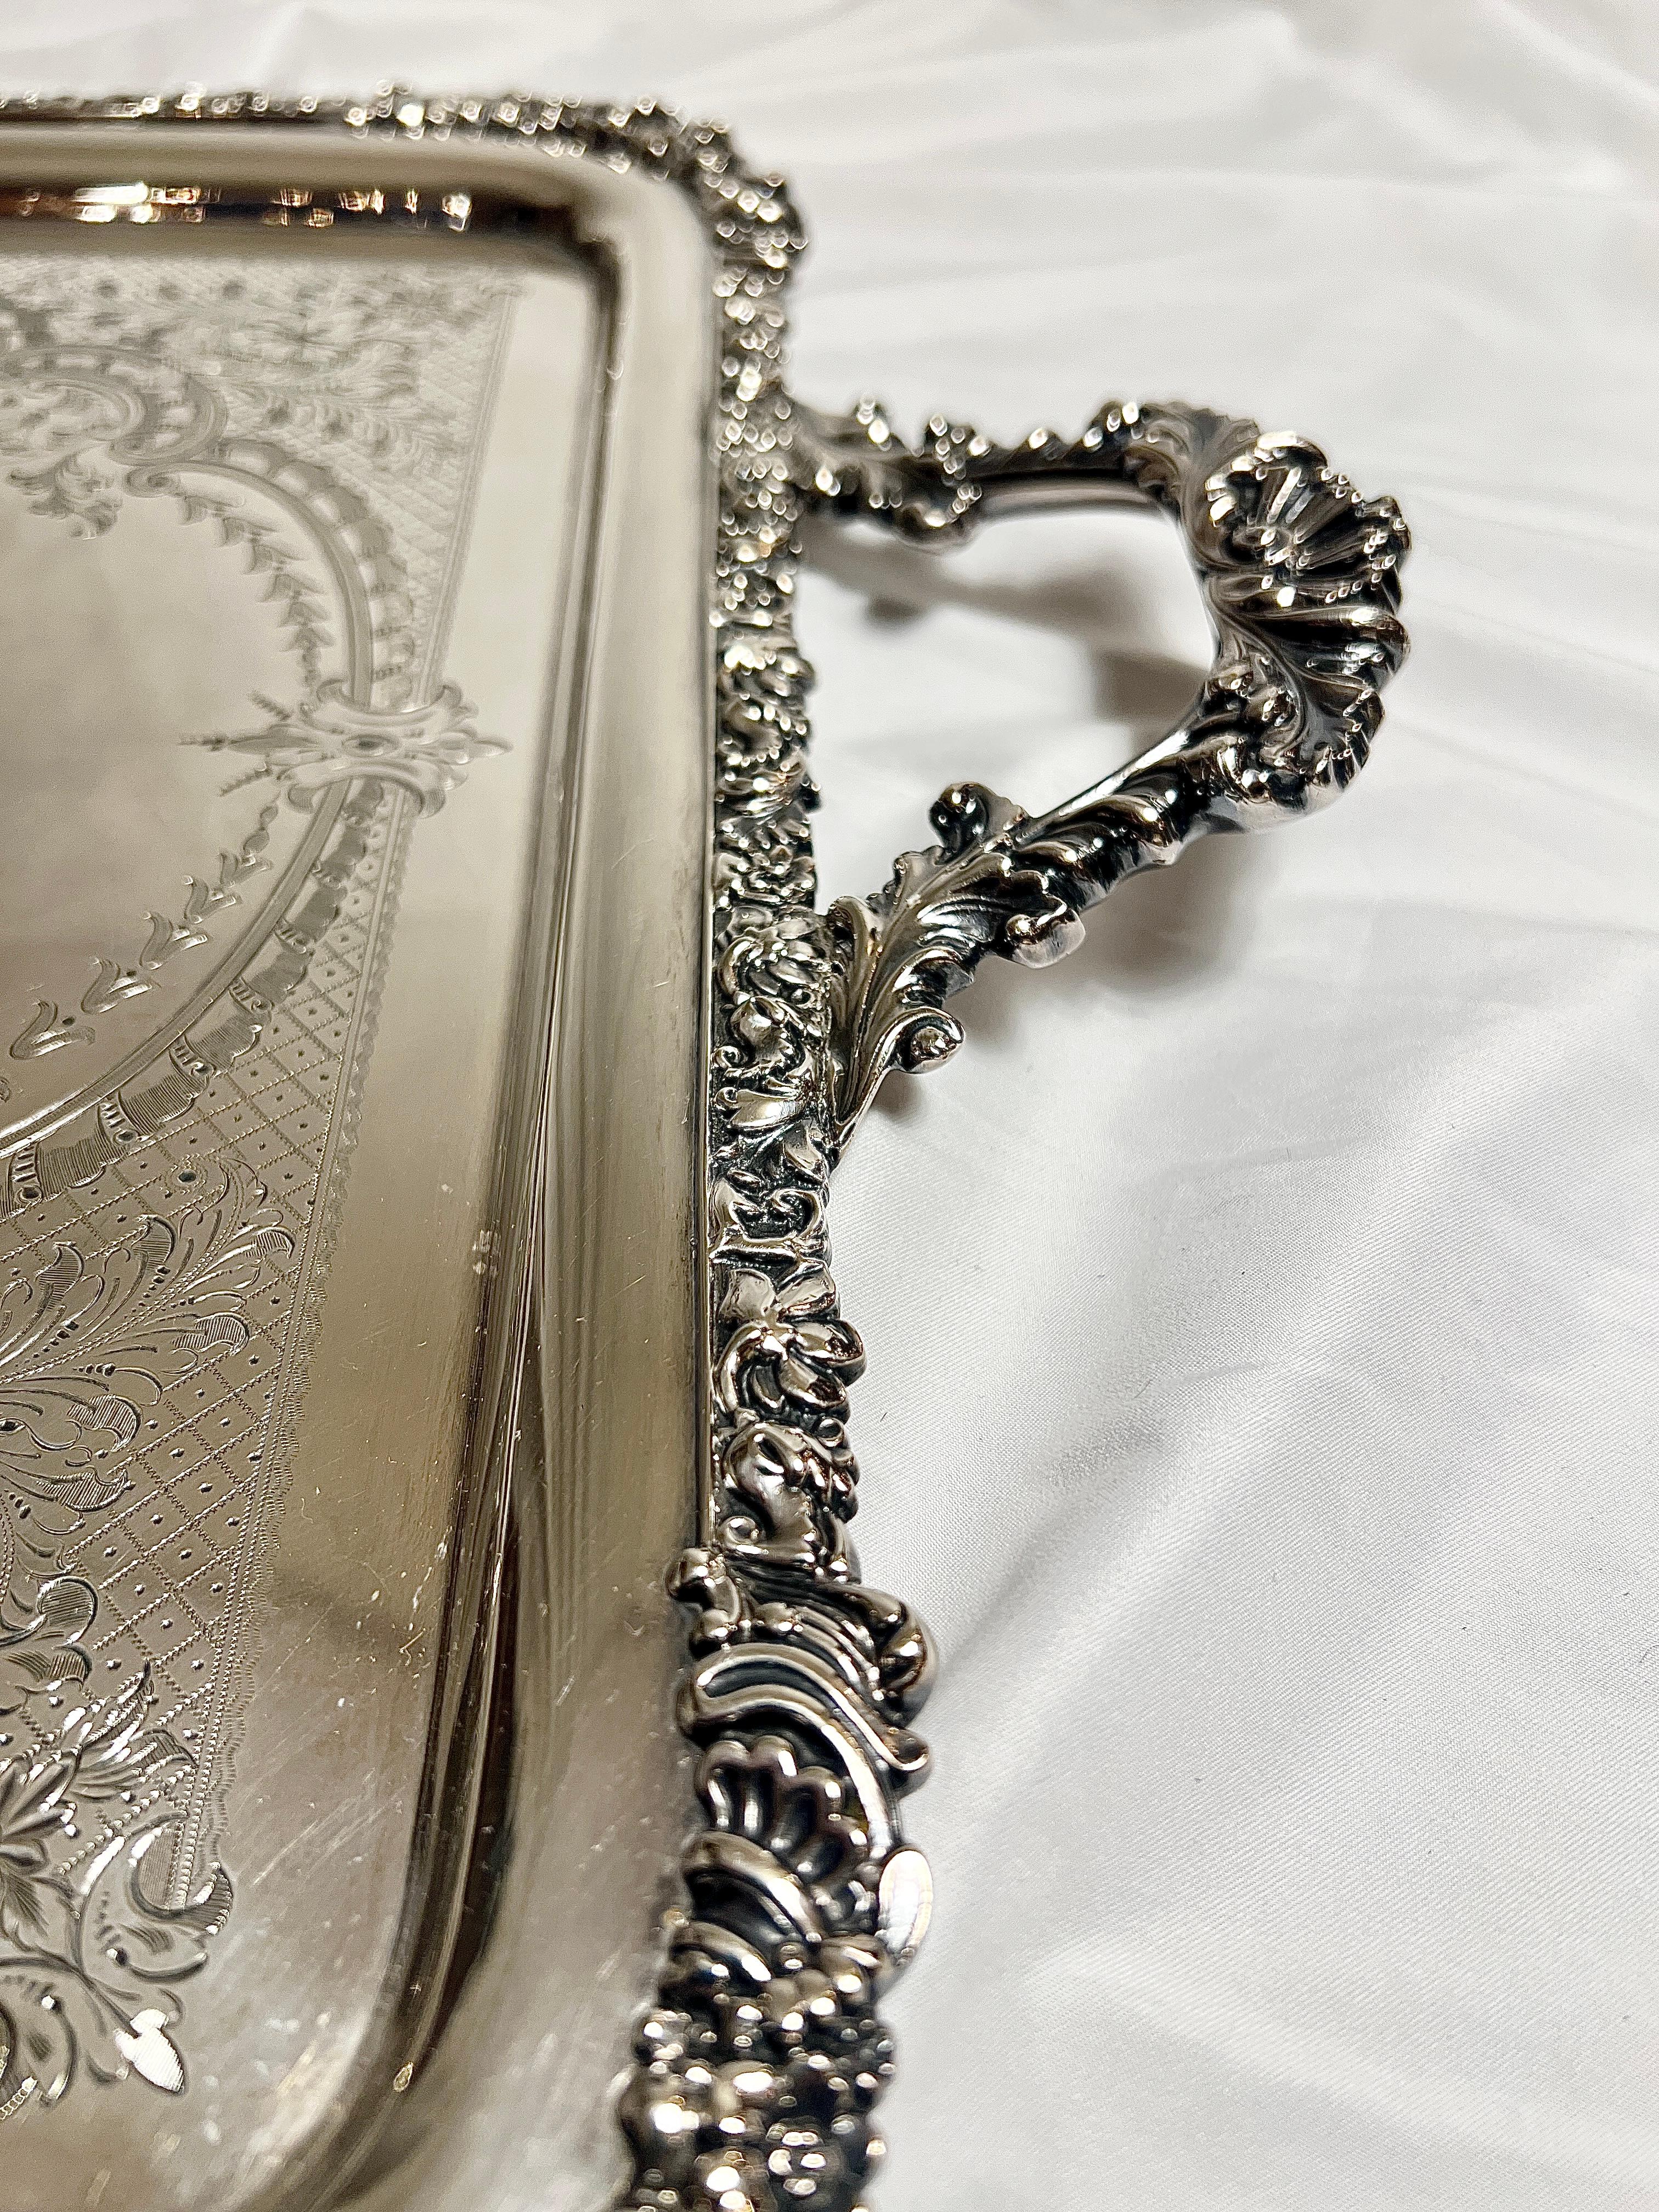 19th Century Antique Silver Plated Service Tray with Engraving and Rolled Border, Circa 1890. For Sale